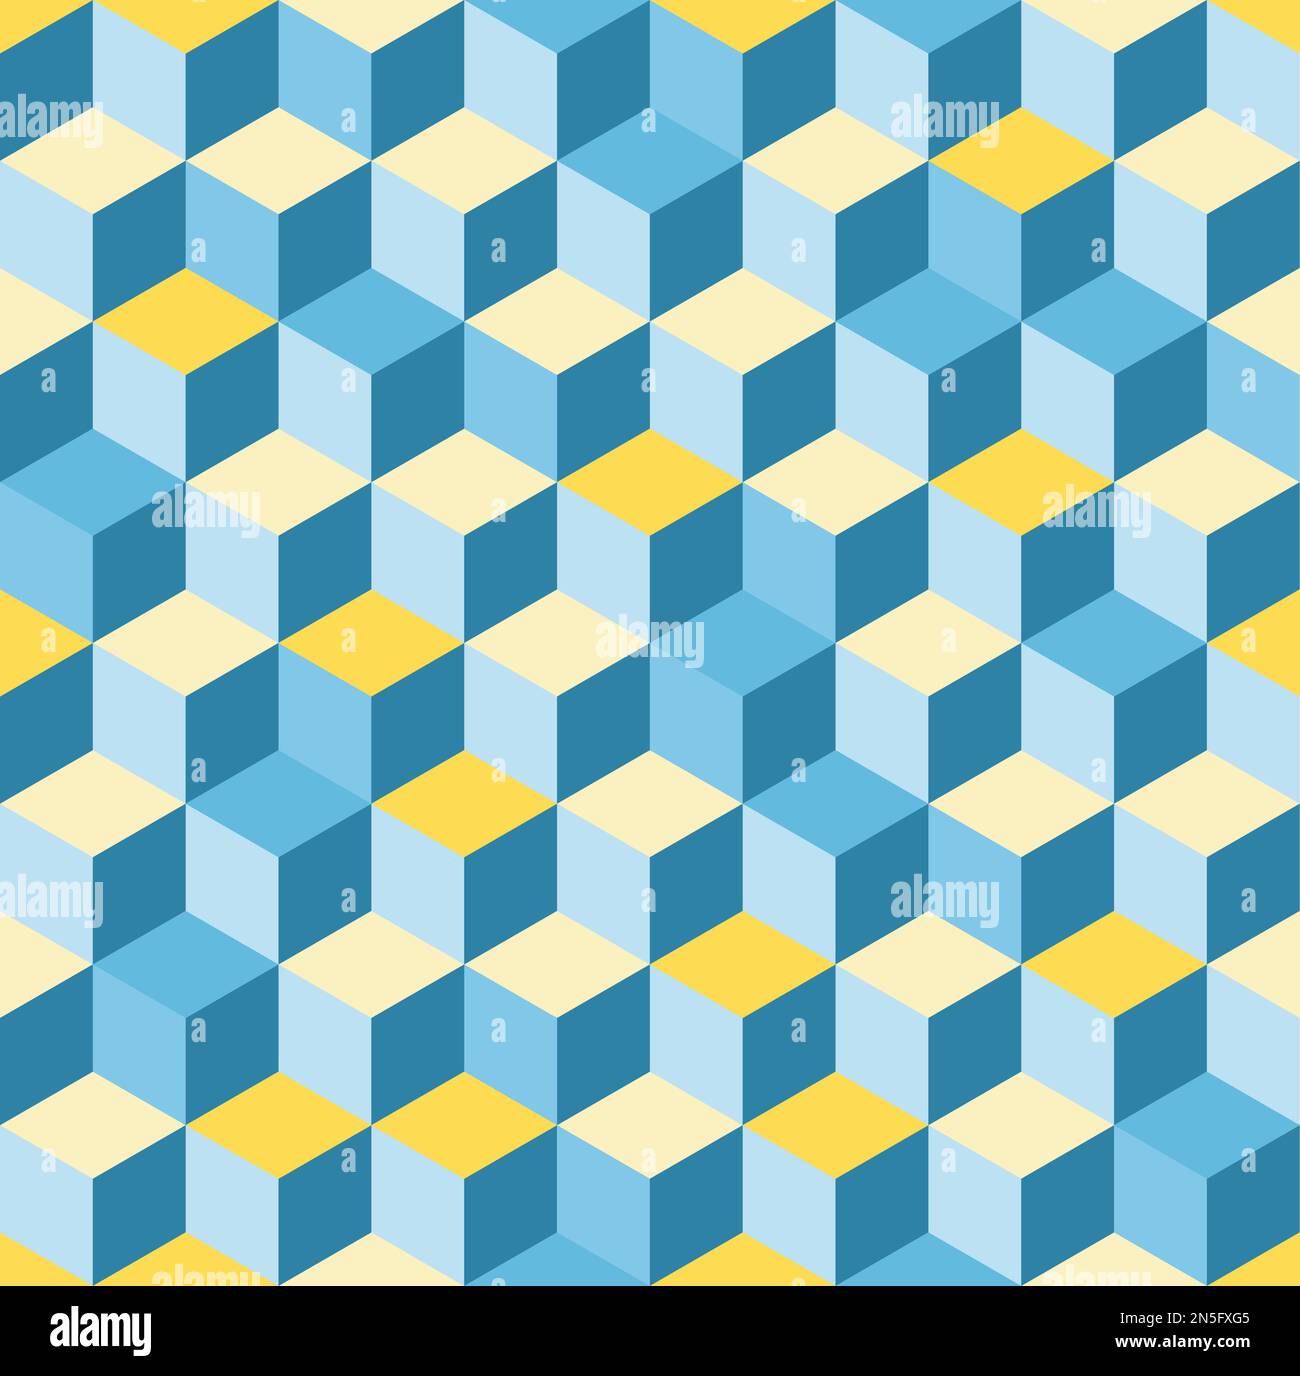 Abstract cube pattern. 3D optical illusion tumbling blocks hexagon tiles. Cuboid seamless tiles pattern. Yellow and blue vector background. Stock Vector